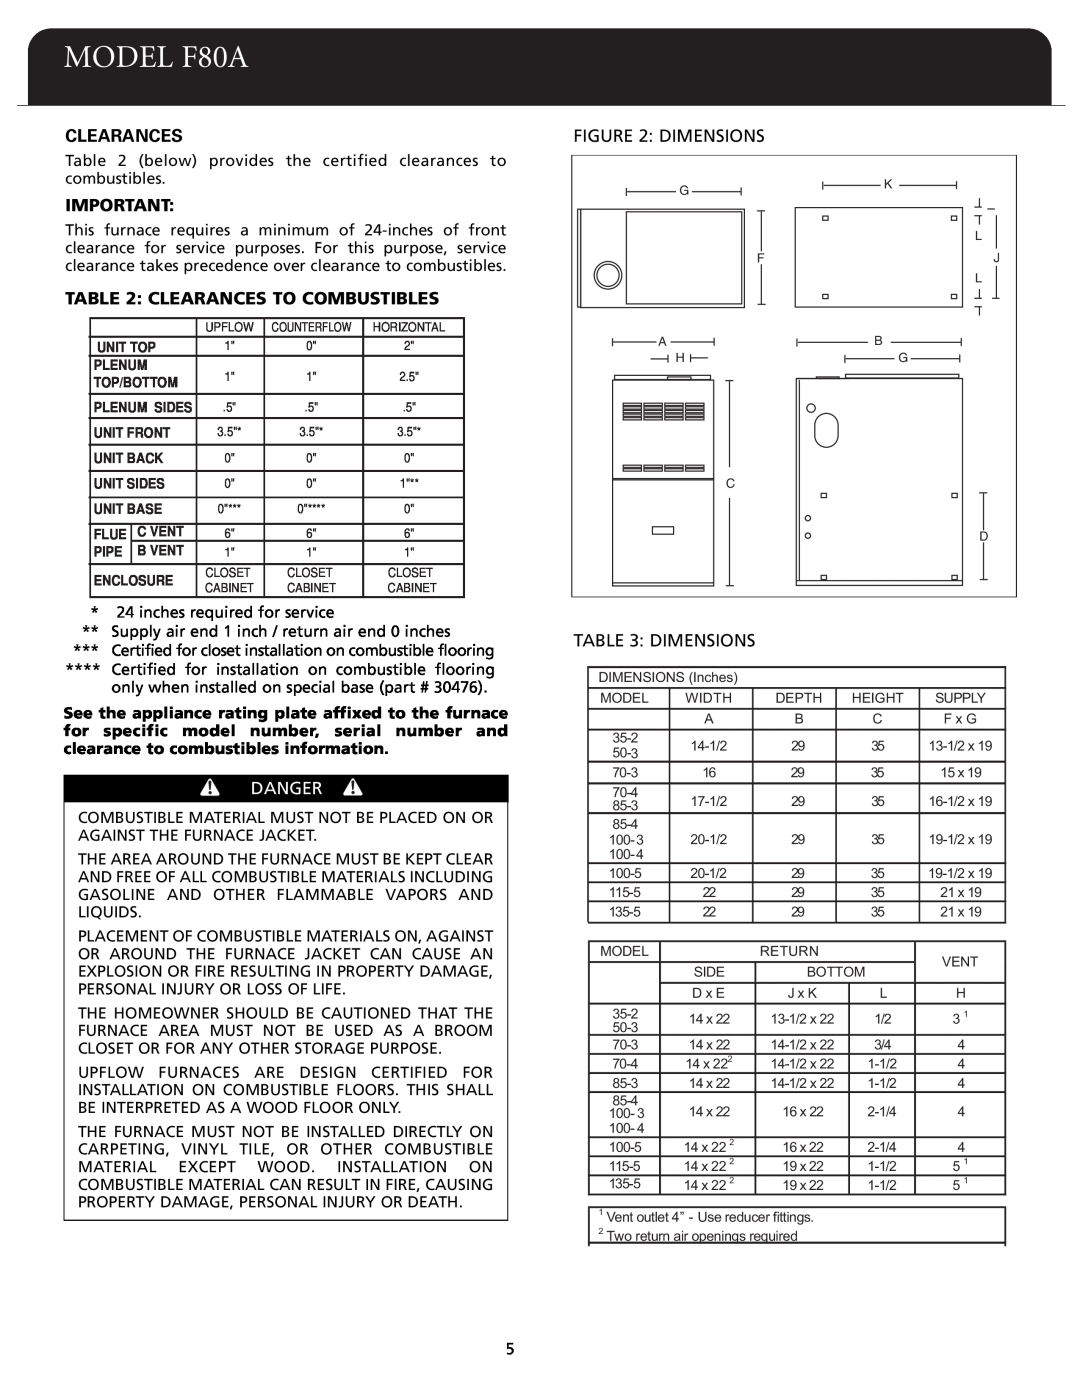 Fedders dimensions Clearances To Combustibles, Dimensions, MODEL F80A, Danger 